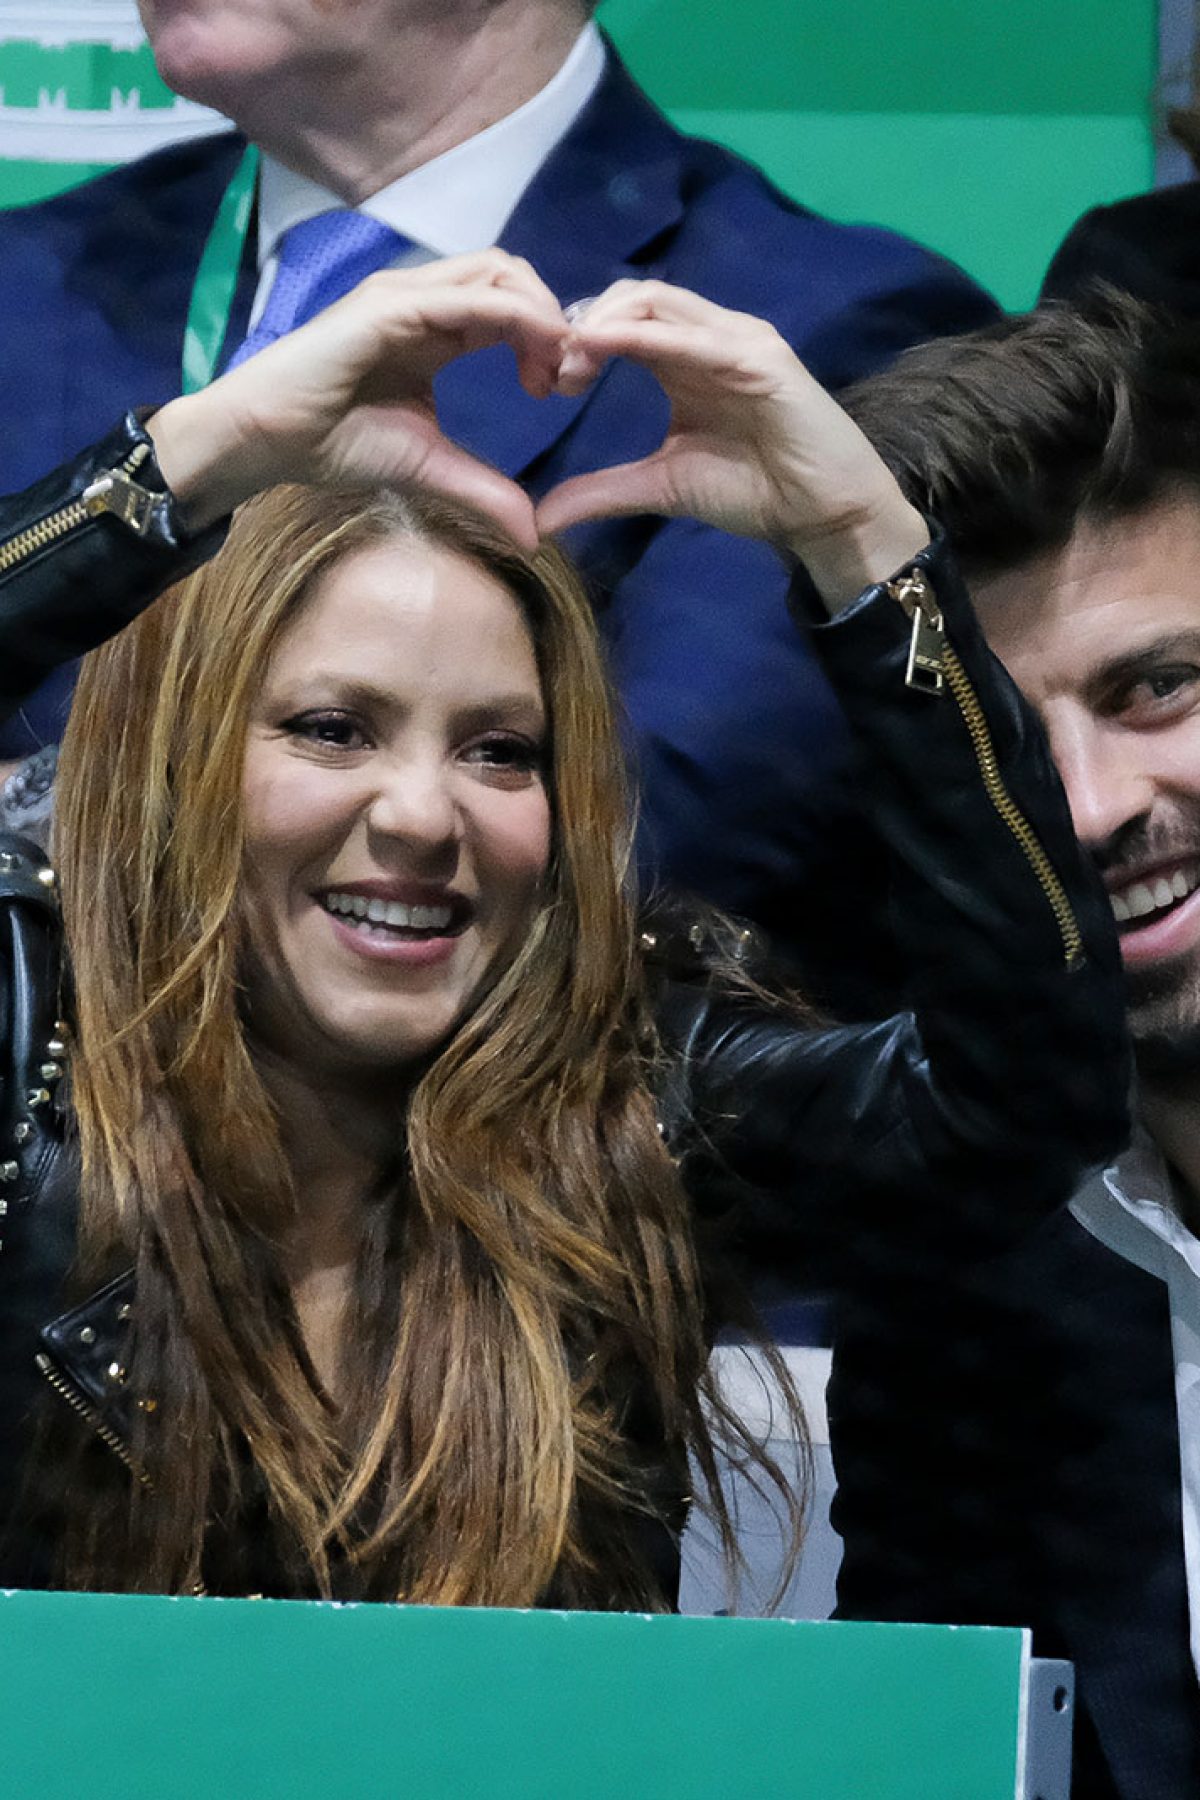 Musician Shakira and football player Gerard Pique watch the 2019 Davis Cup final match between Rafael Nadal of Spain and Denis Shapovalov of Canada at La Caja Magica on November 24, 2019 in Madrid, Spain. (Photo by Oscar Gonzalez/NurPhoto via Getty Images)